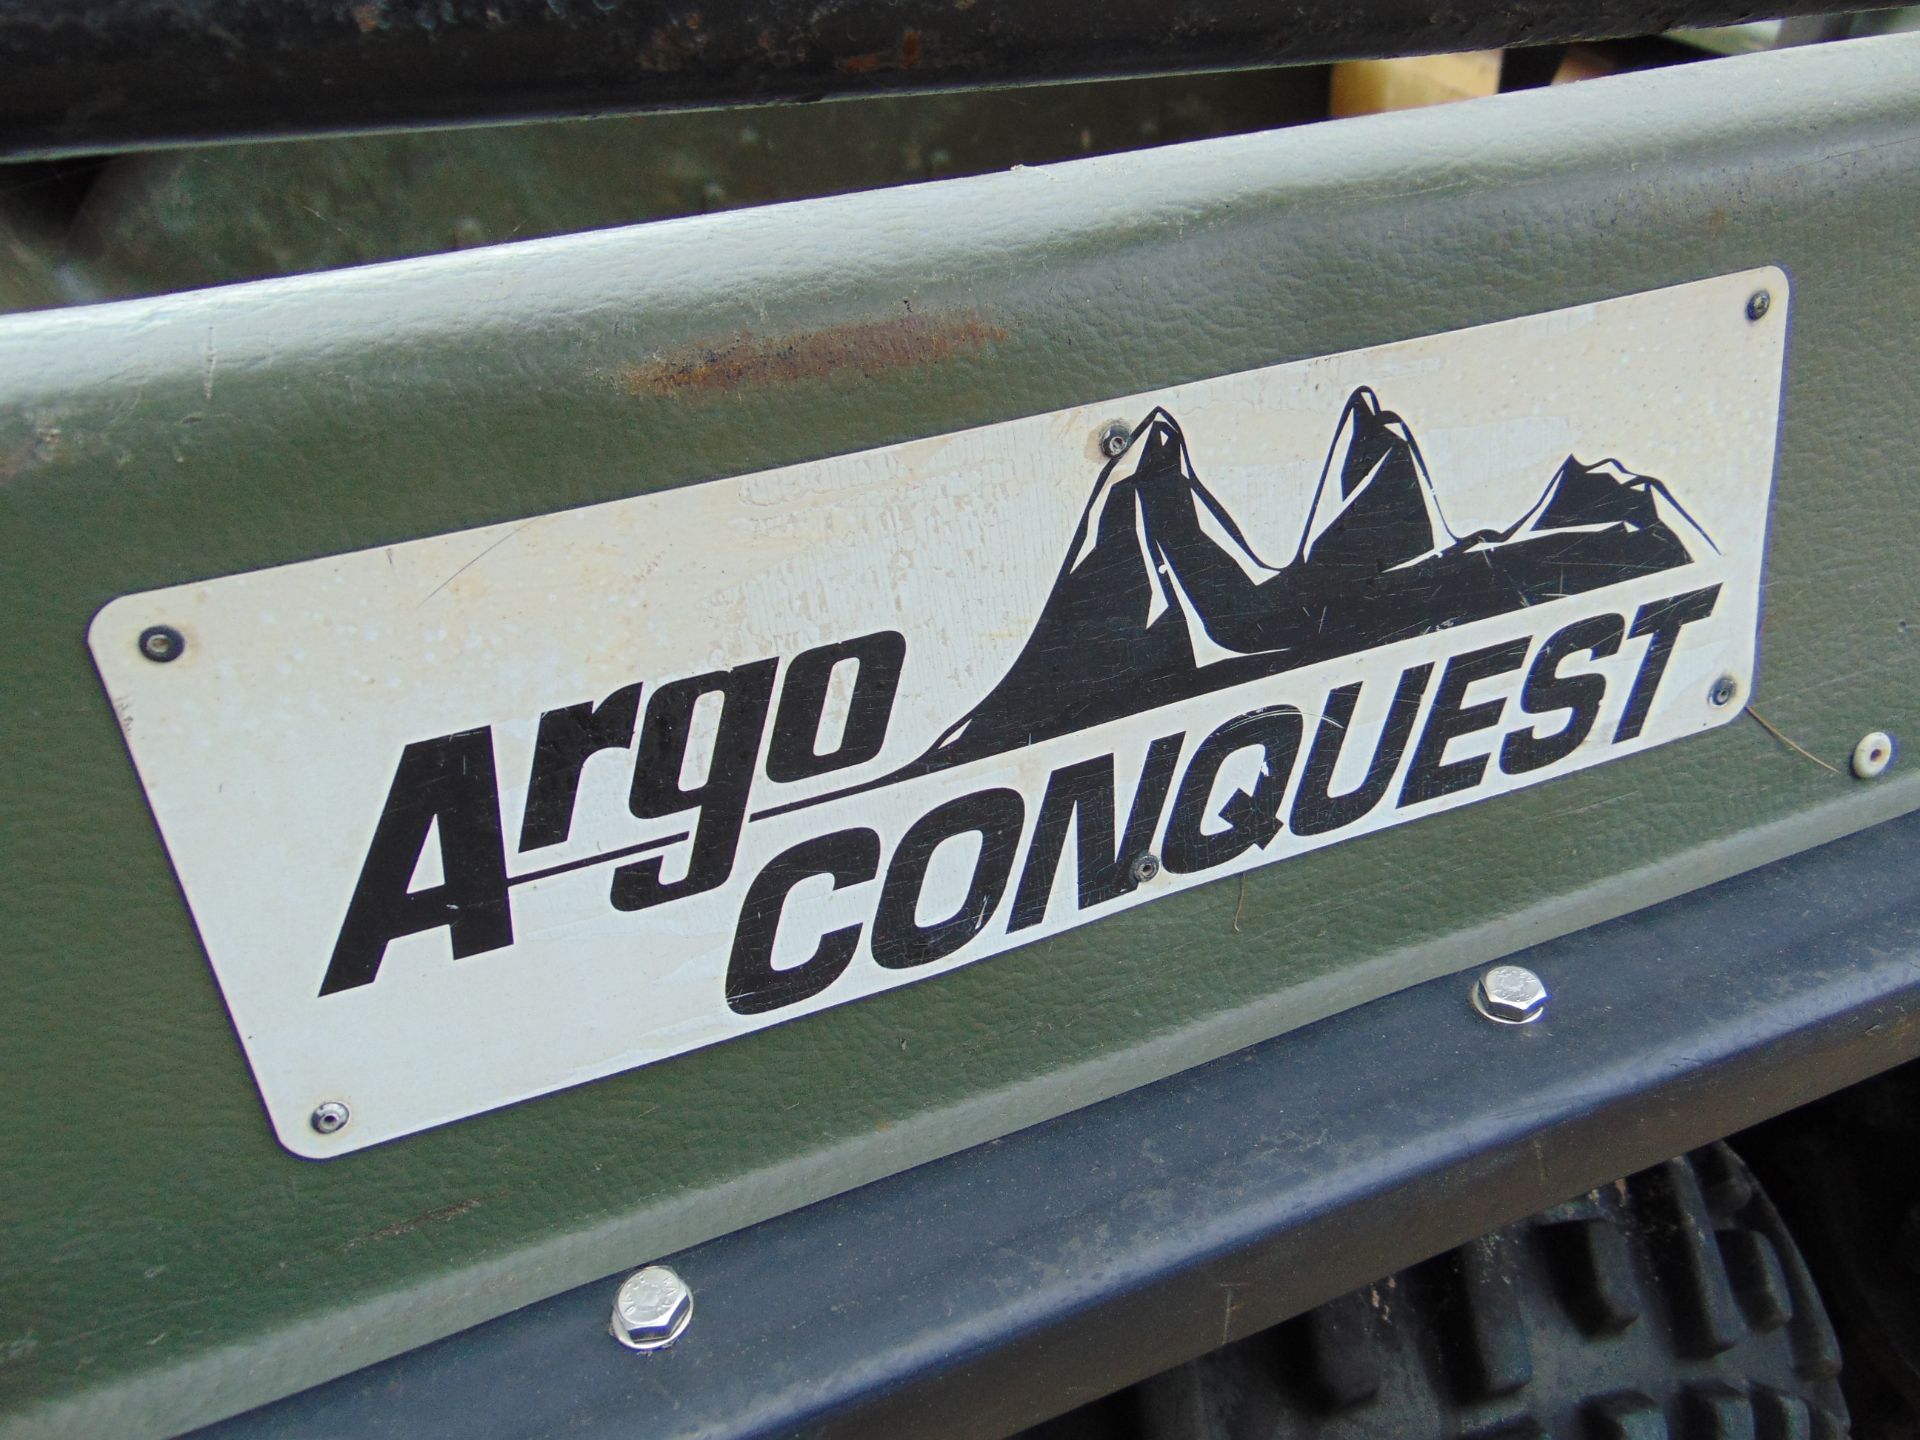 Argocat 8x8 Conquest Amphibious ATV c/w Roll Cage ONLY 541 HOURS! - Image 18 of 18